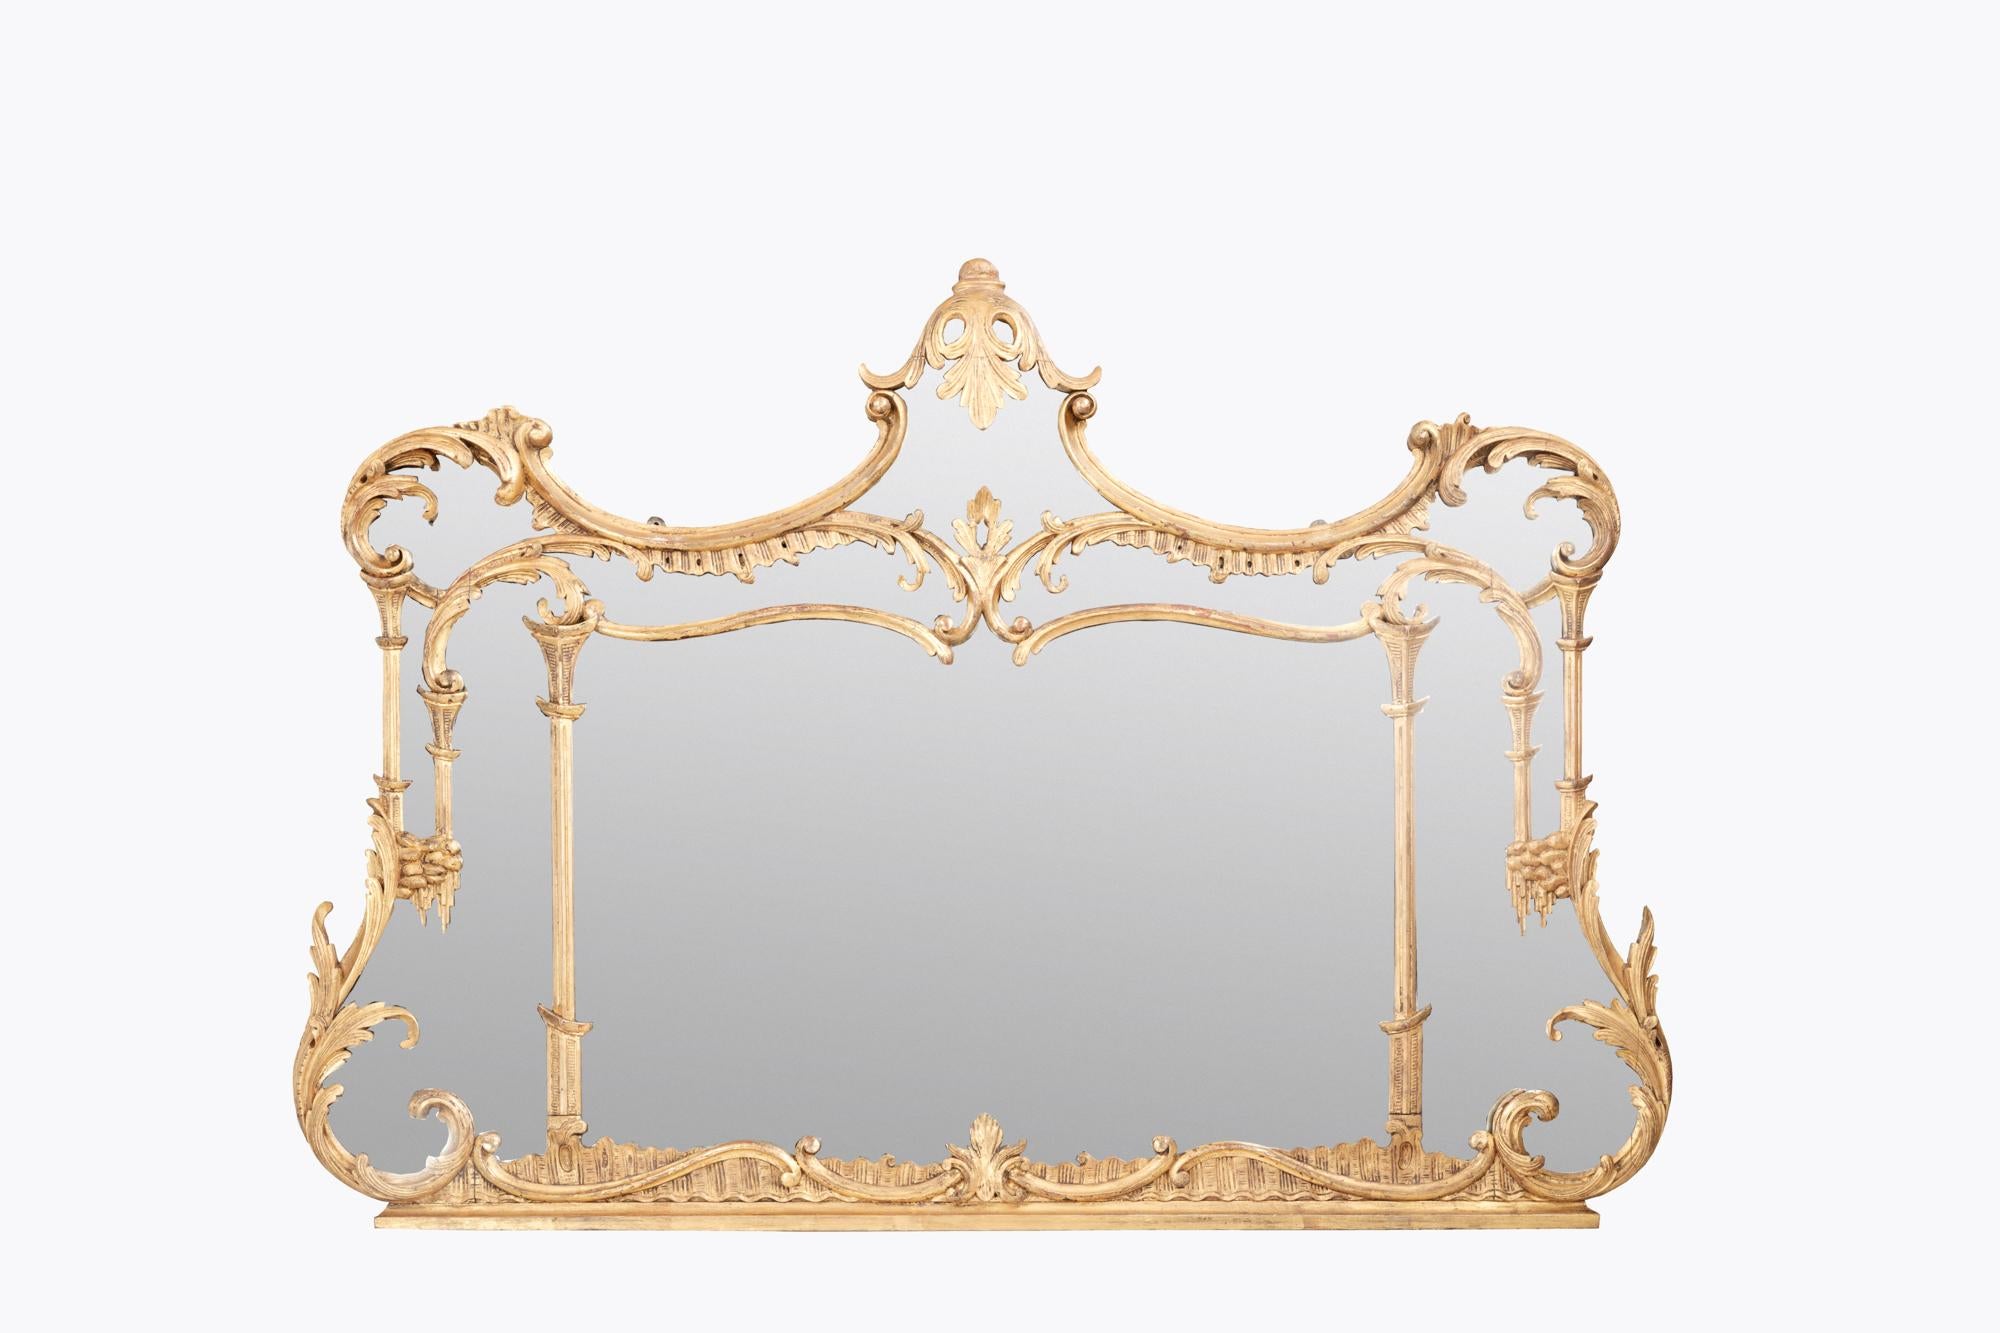 19th Century overmantel mirror with sweeping acanthus leaf and scroll detailing throughout. The gilt frame is embellished with subtle Chinese Chippendale style features, including pagoda pillars. Stylised waterfall detailing adorns the inner